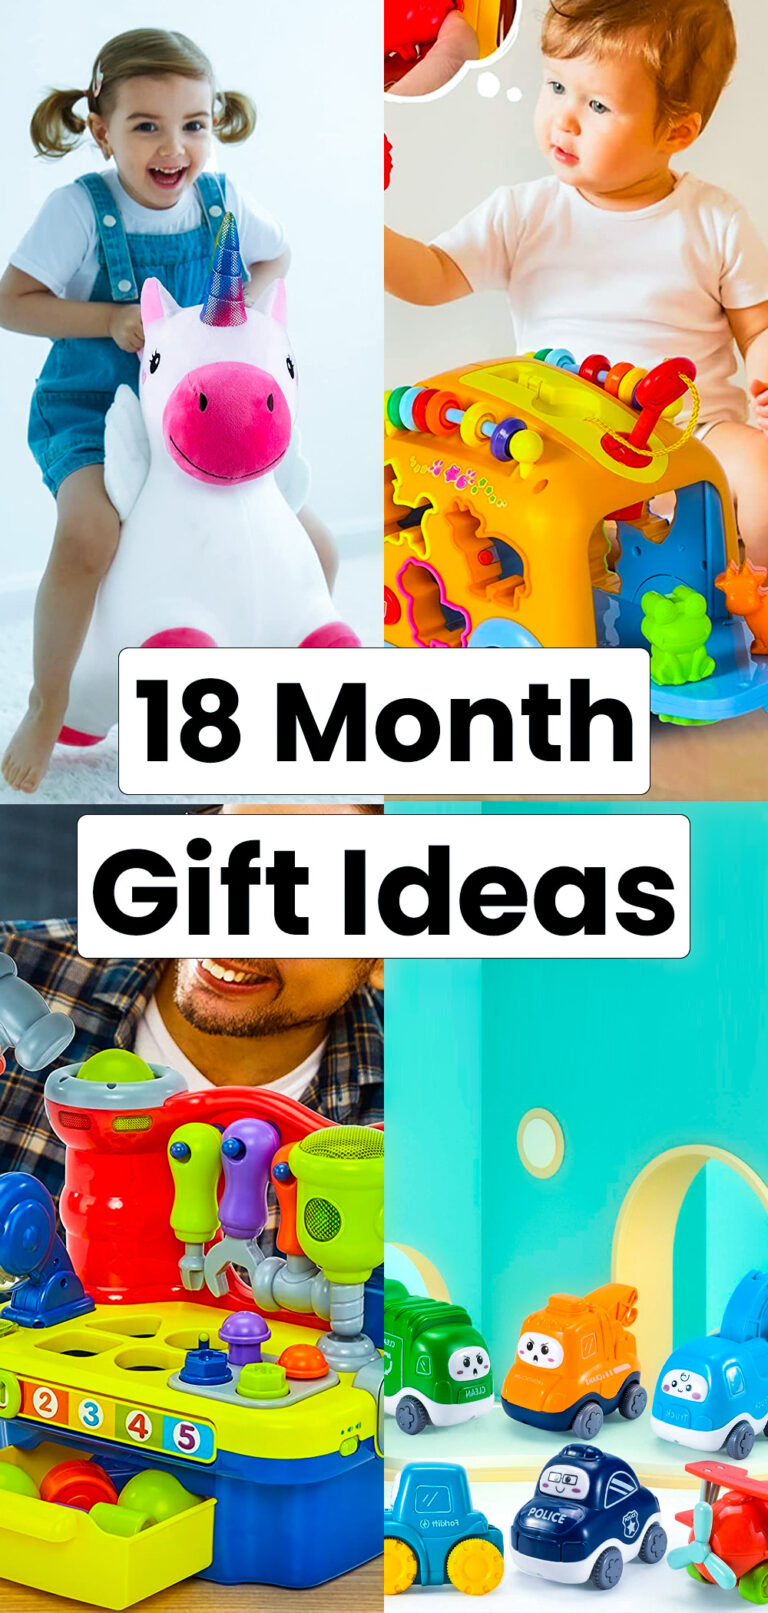 18 Month Gift Ideas